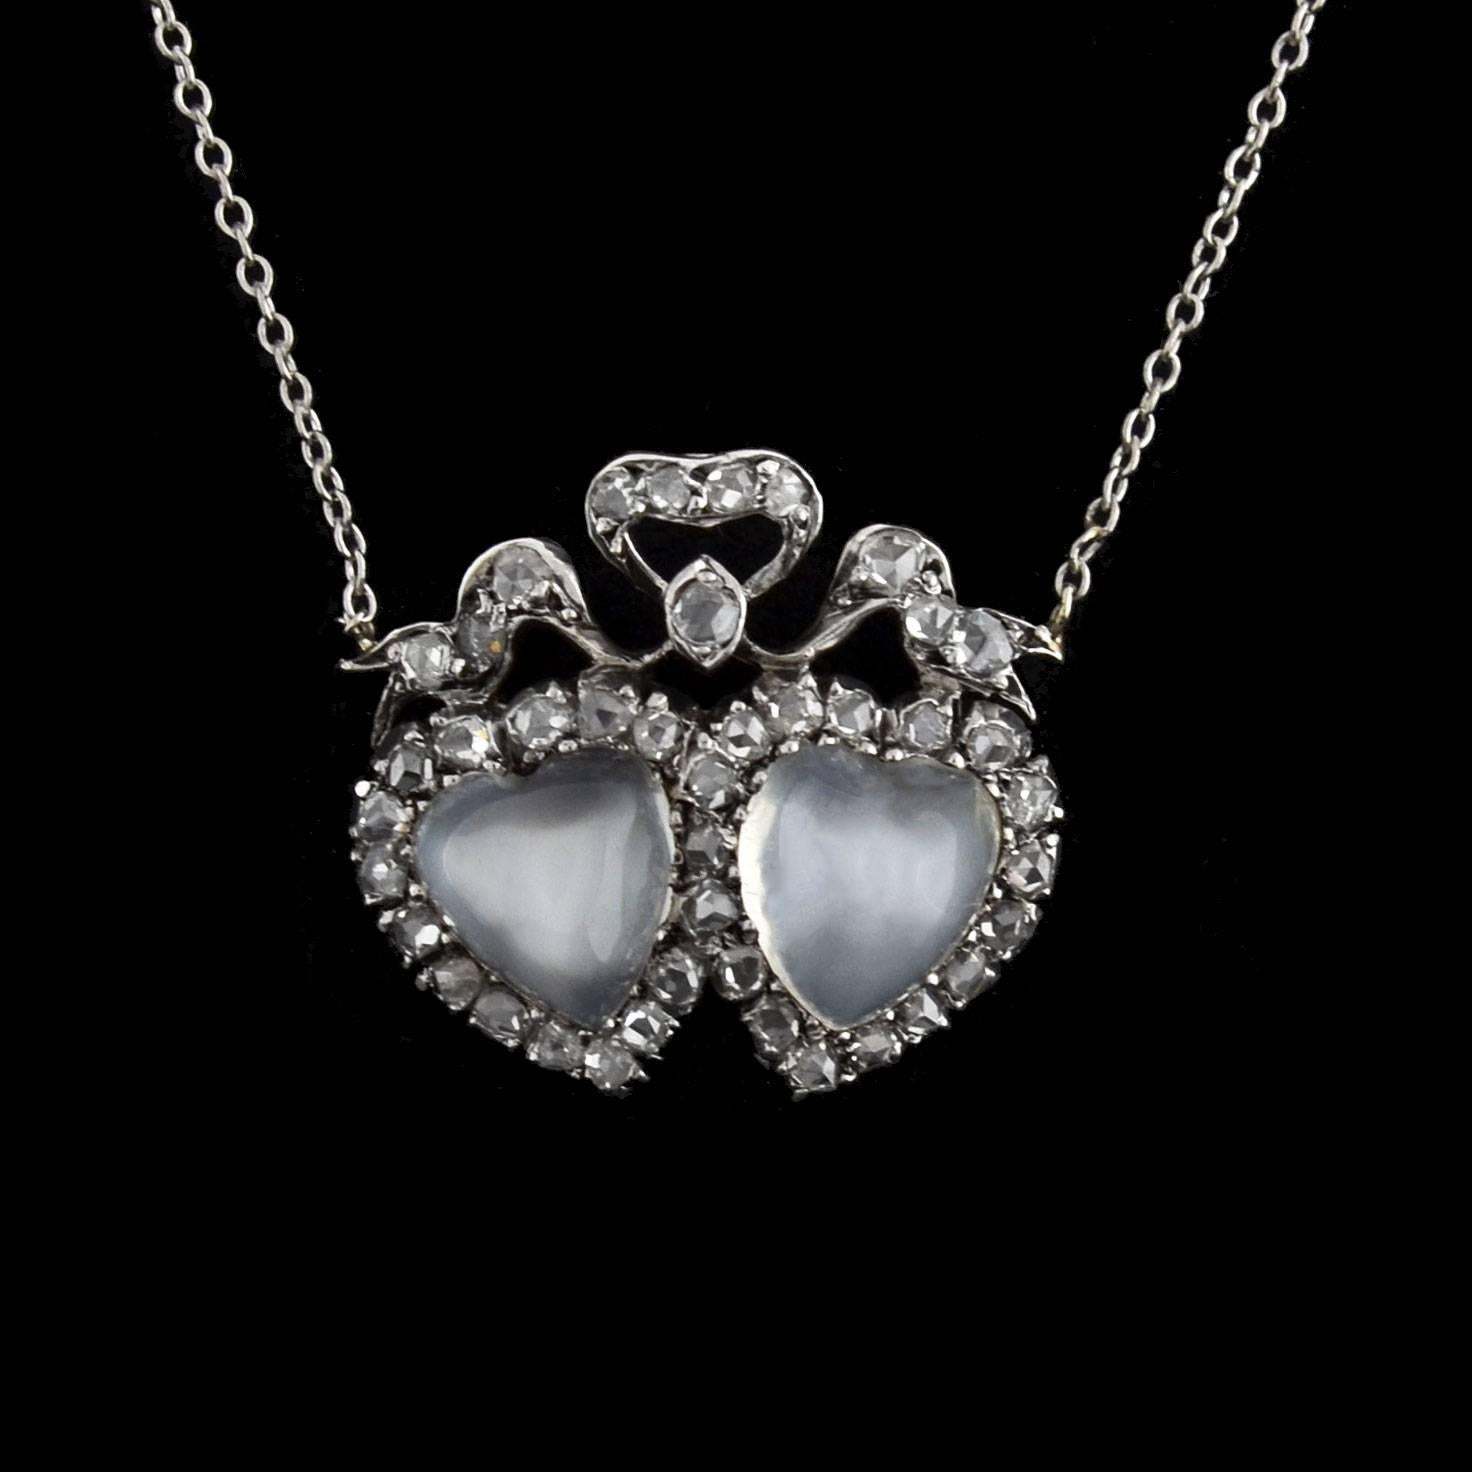 An incredible moonstone and diamond necklace from the late Victorian (ca1900) era! This gorgeous piece is made of silver-topped 14kt yellow gold and has a romantic double heart design. Two heart-shaped moonstone cabochons are nestled together at the